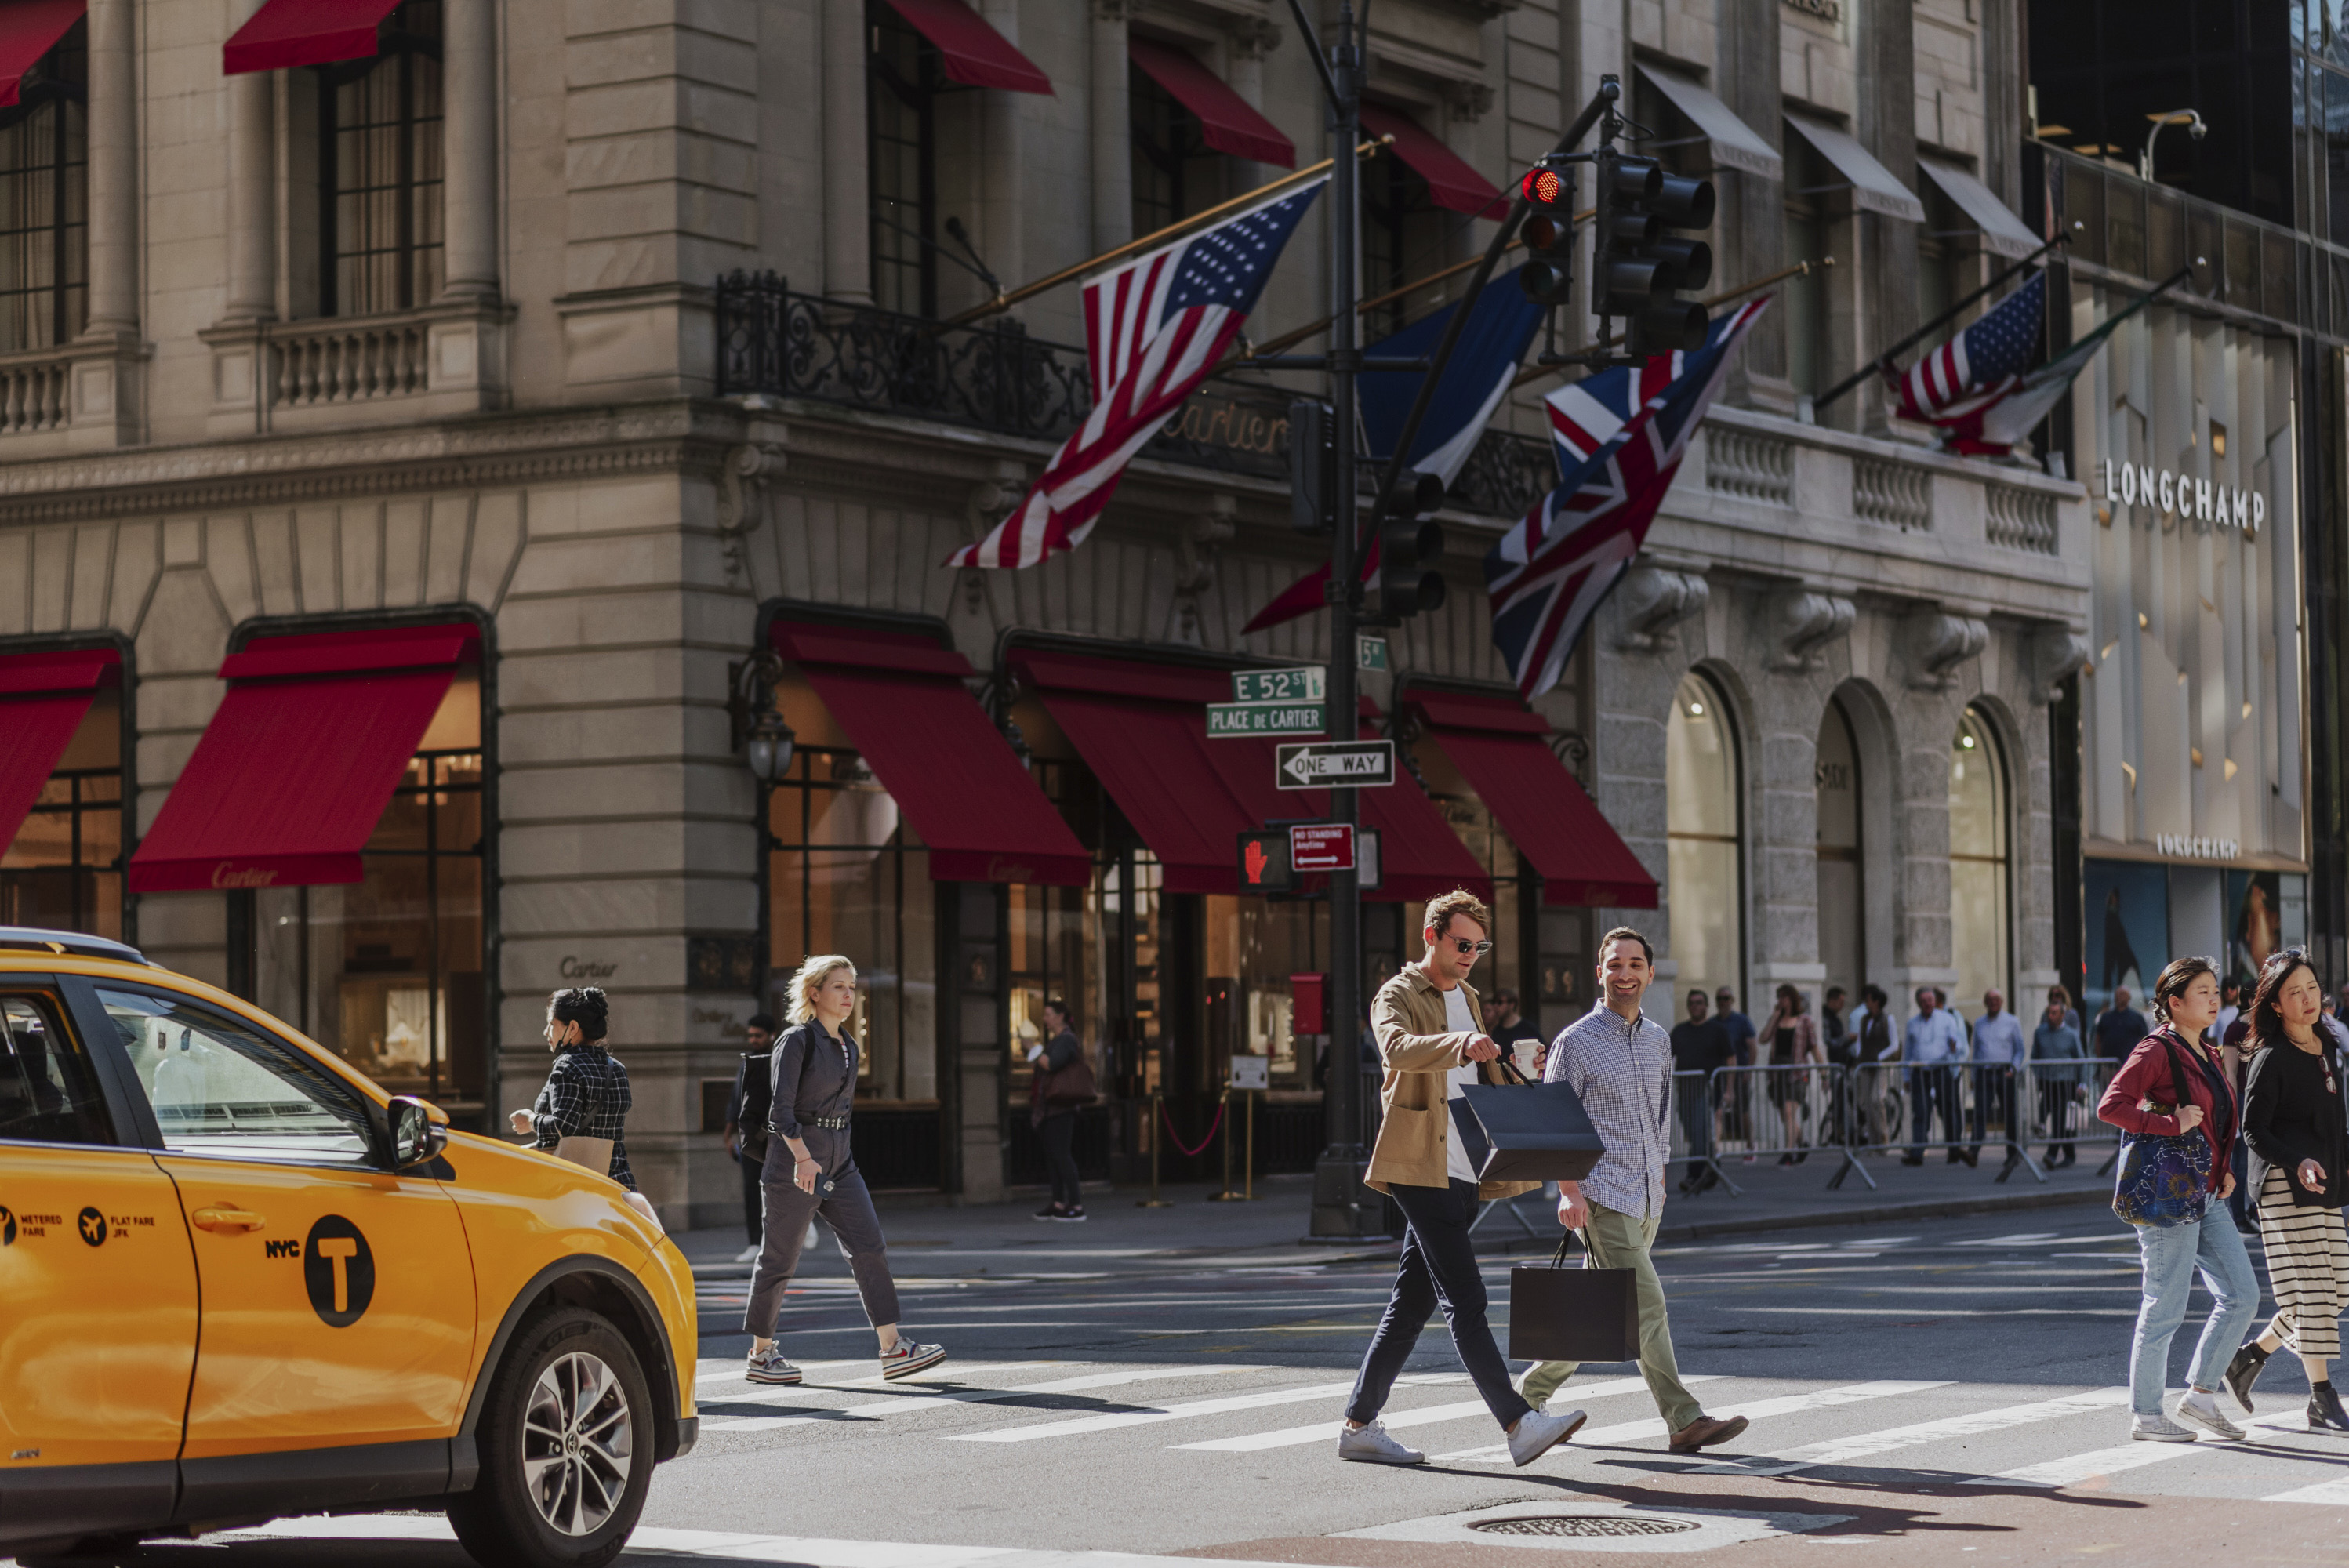 Study: Manhattan's Fifth Avenue is most expensive retail street in